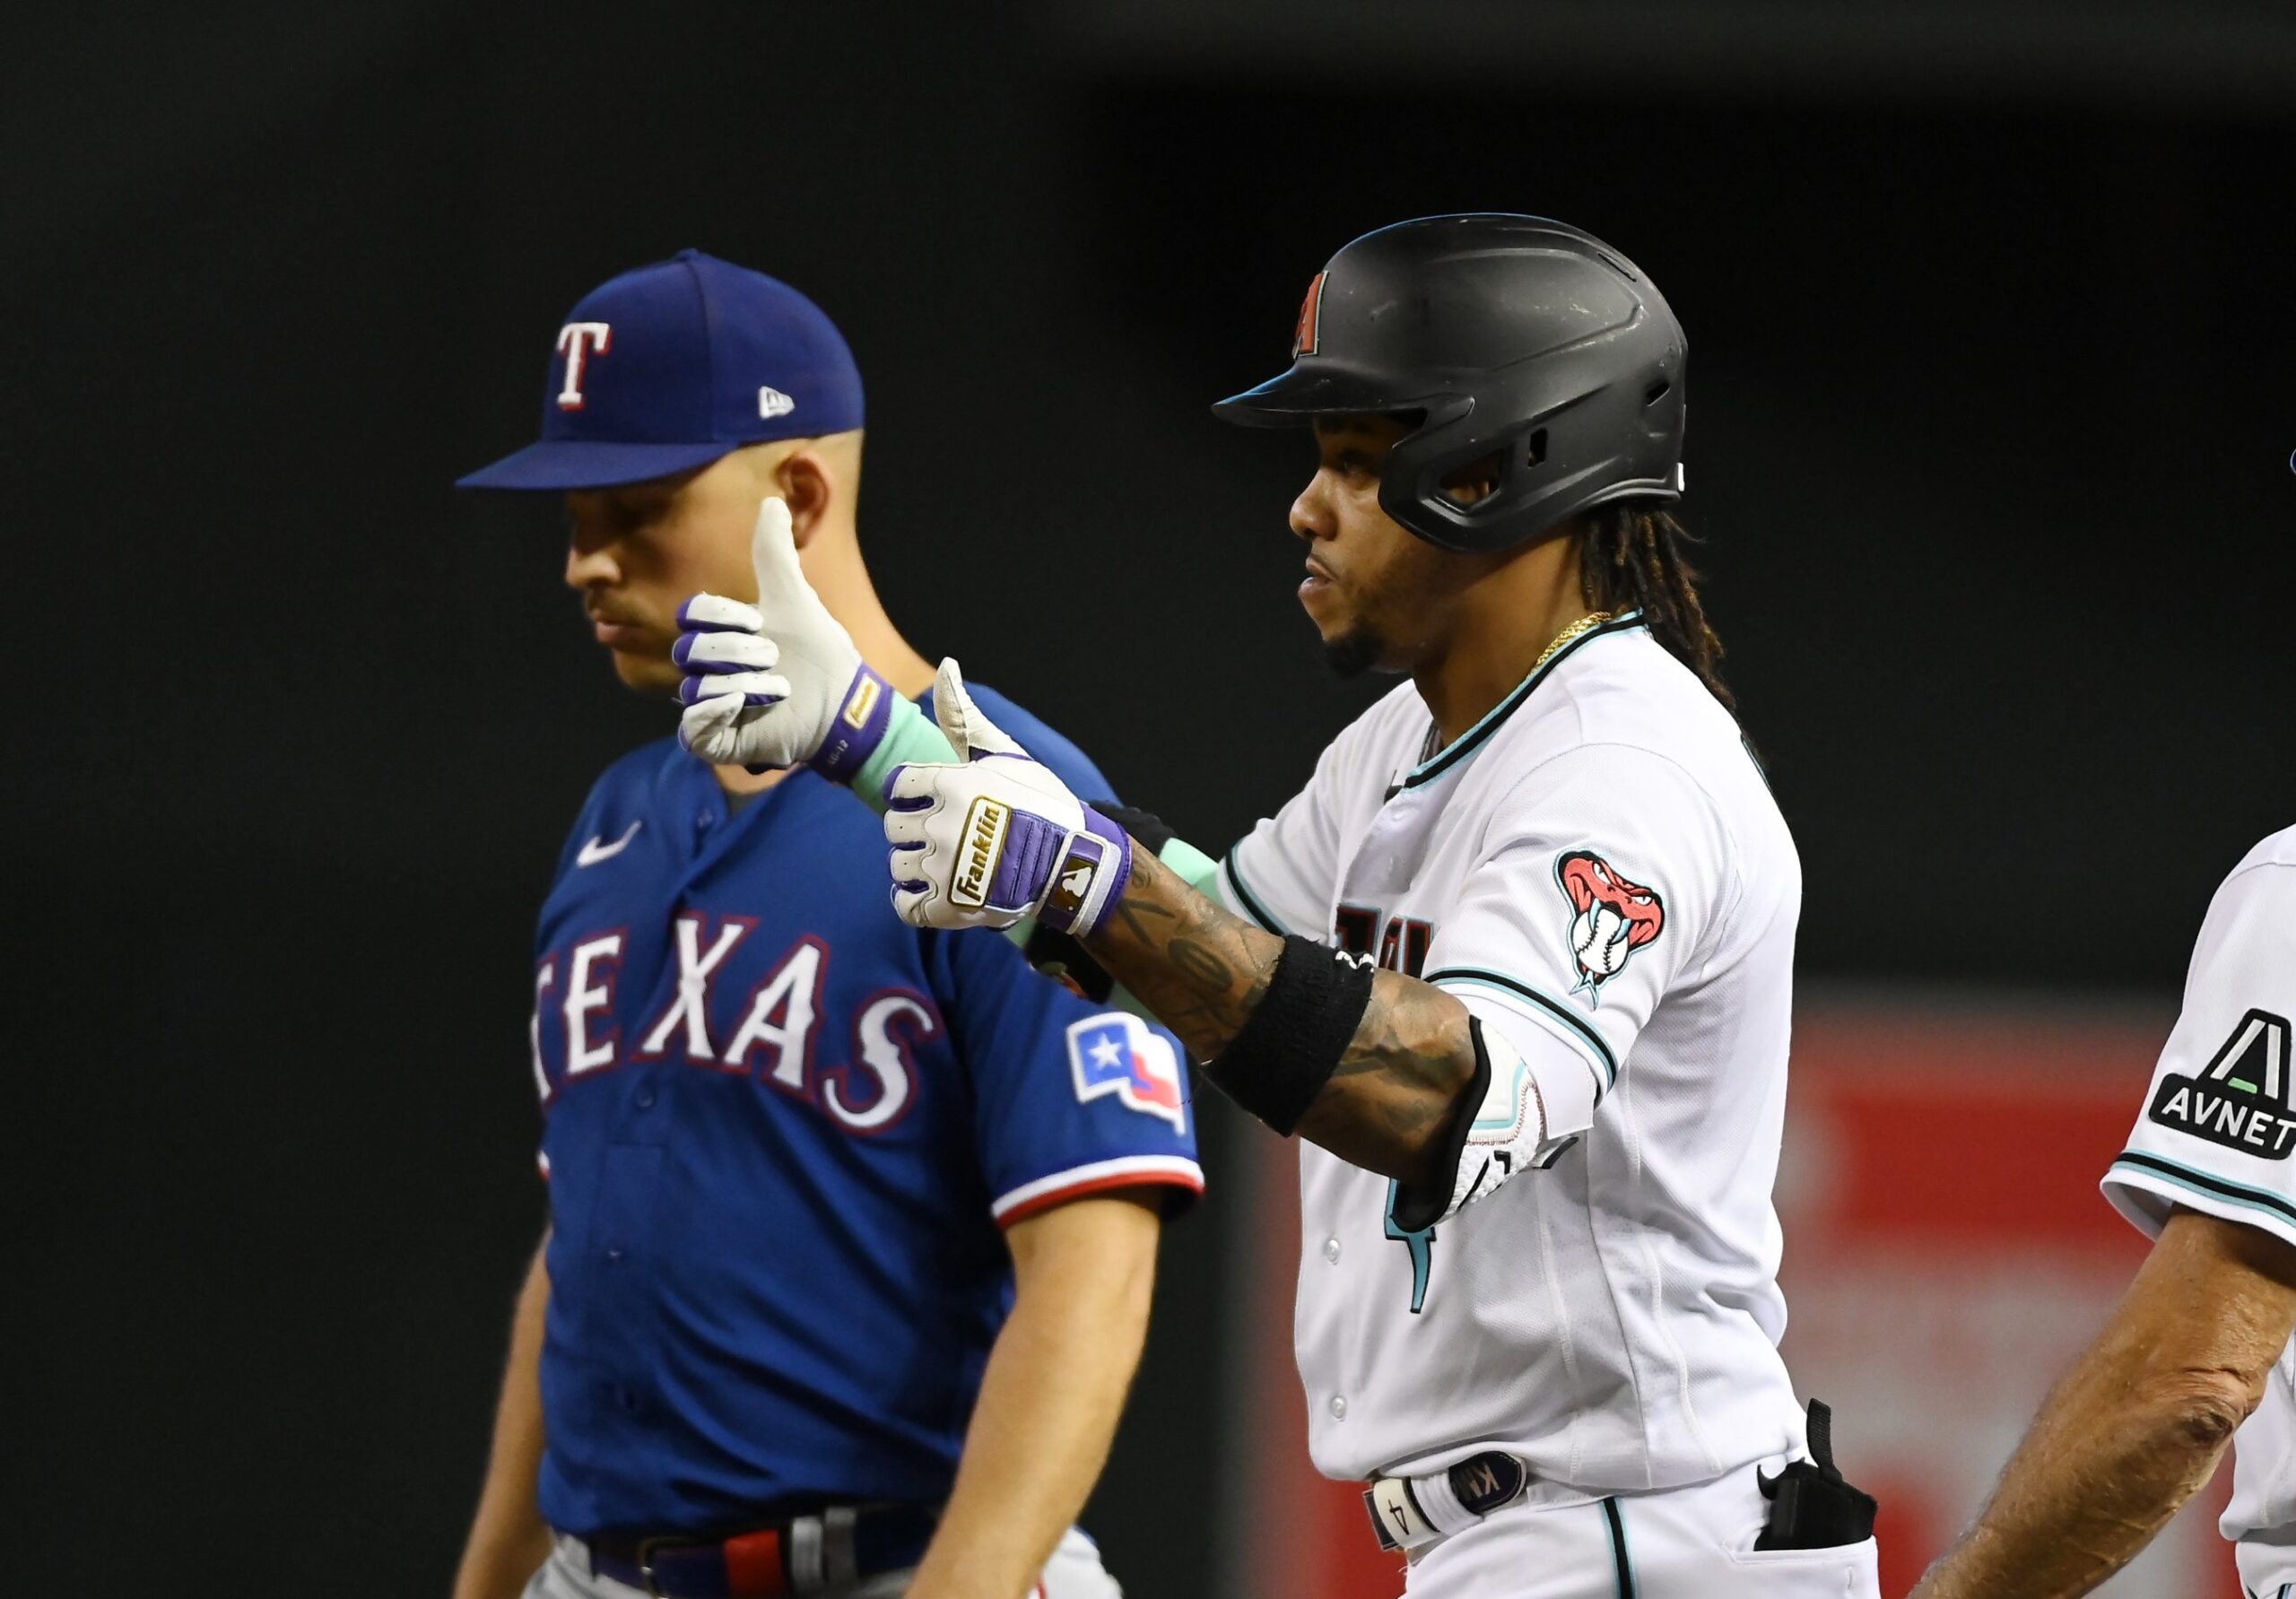 Texas Rangers say Adolis Garcia could have staying power